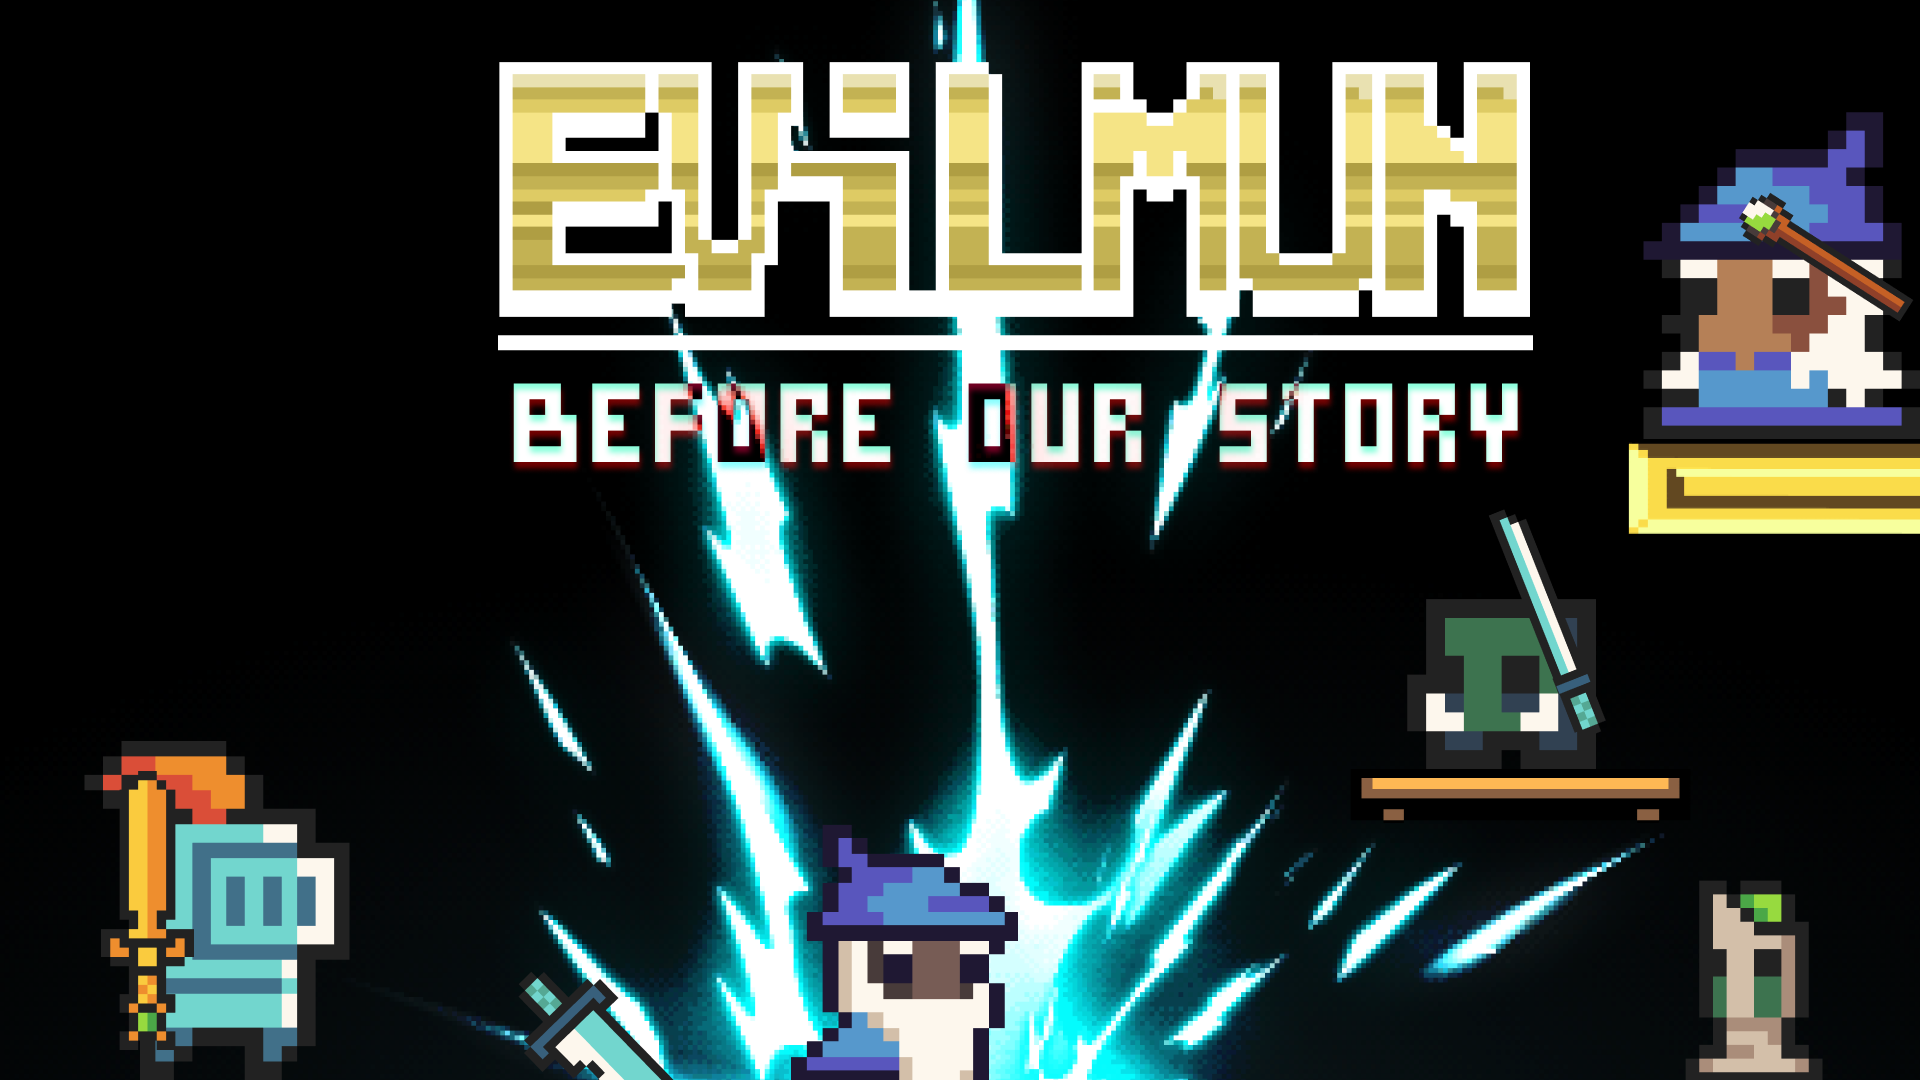 Evilmun: Before our story